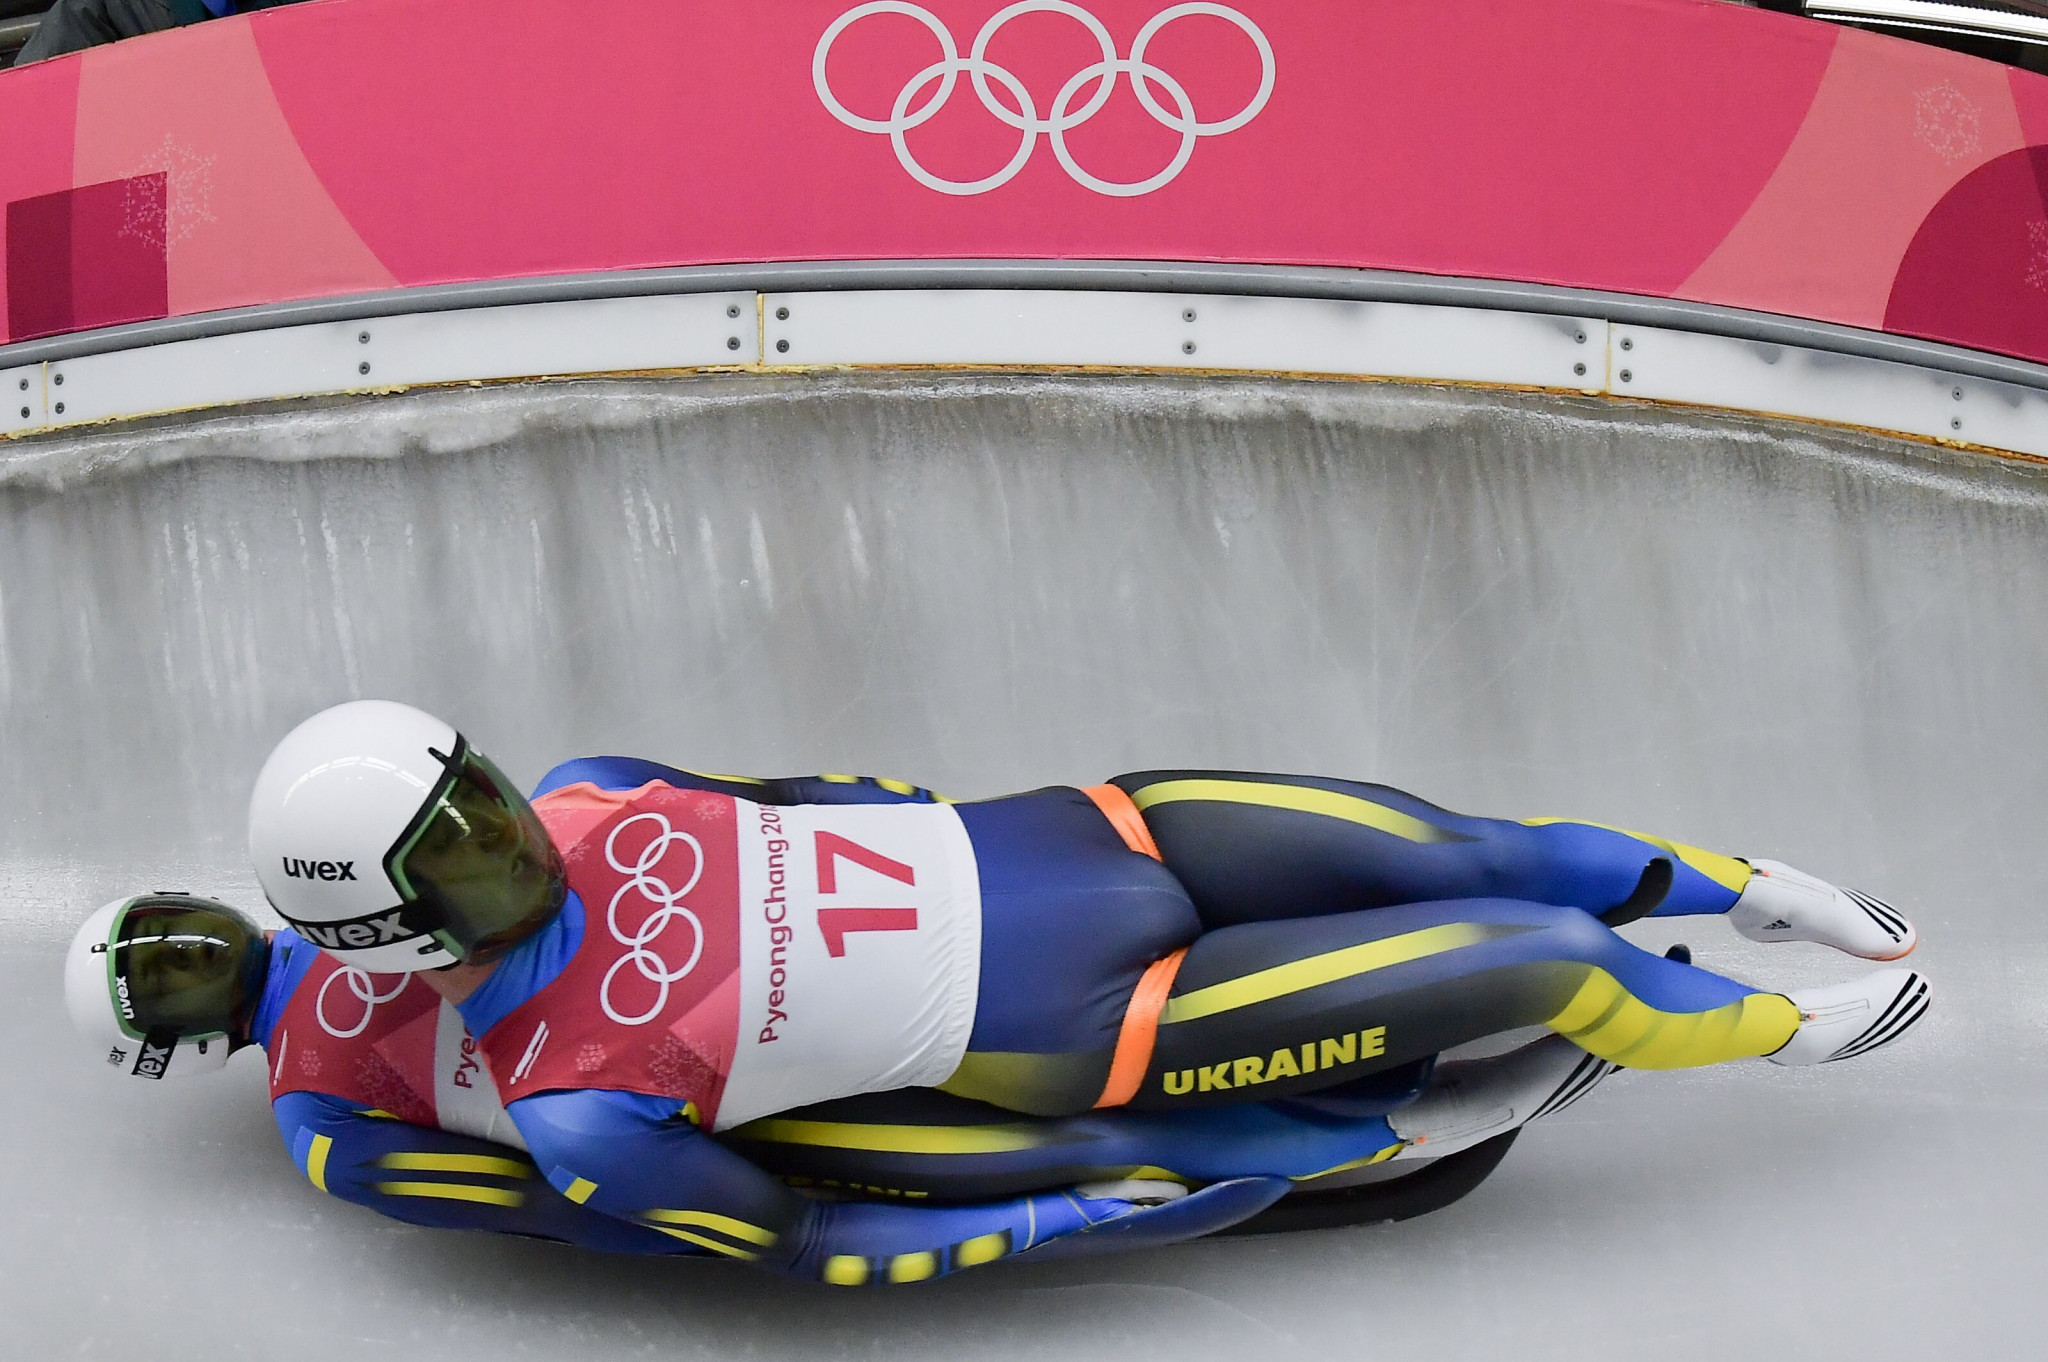 Ukraine finished last in all four luge events at last year's Winter Olympic Games in Pyeongchang ©Getty Images